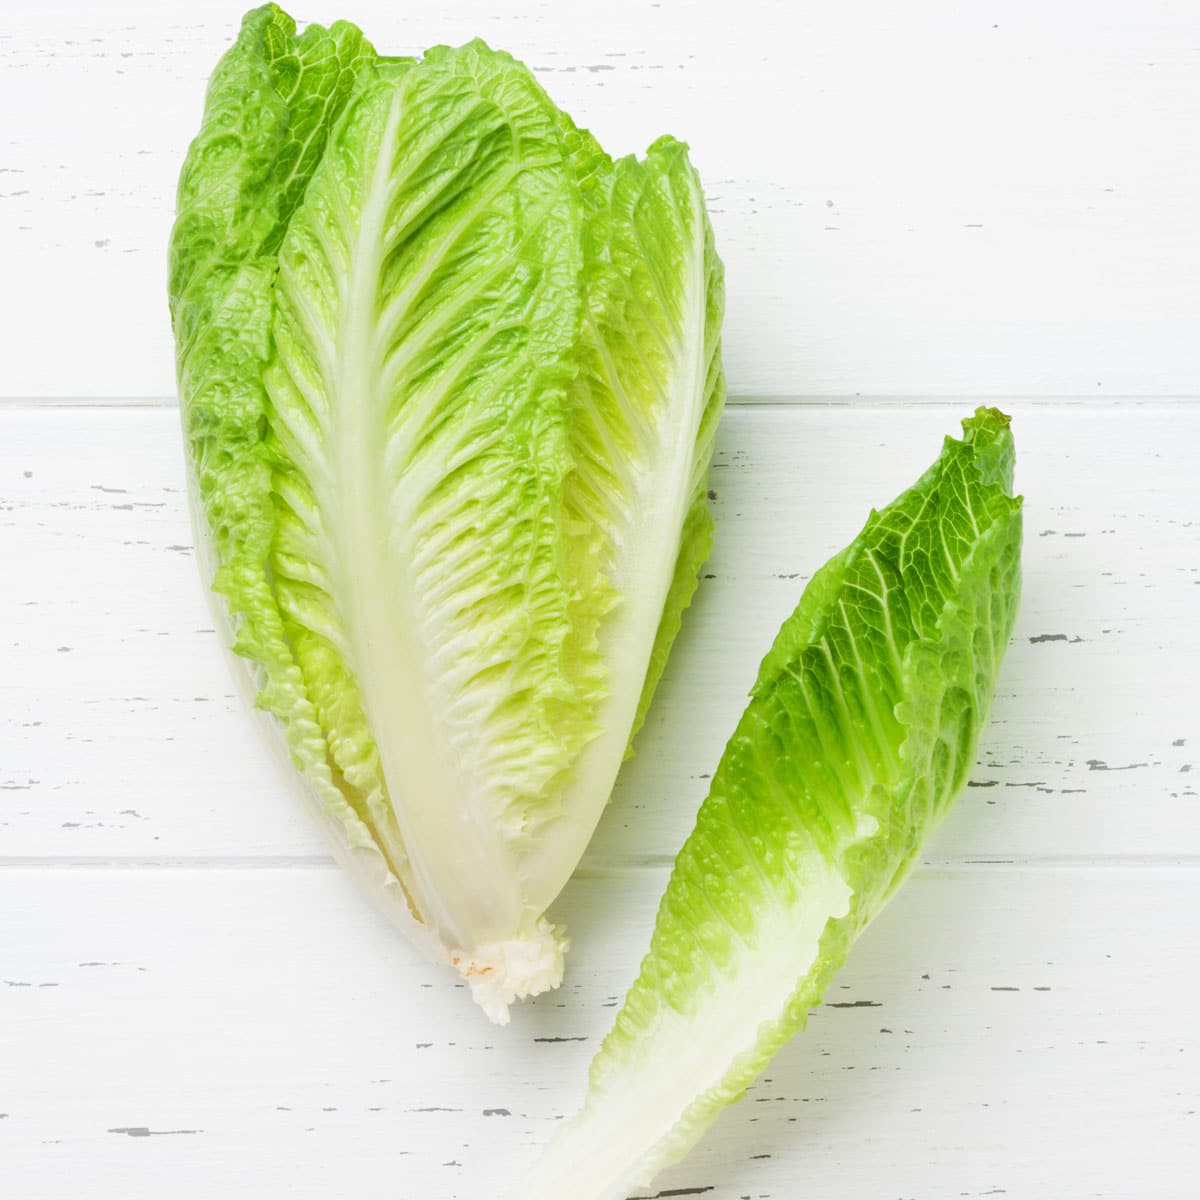 Cabbage has a round, short stem, and while they may have a few floppy outer leaves while lettuce has an elongated oblong form.